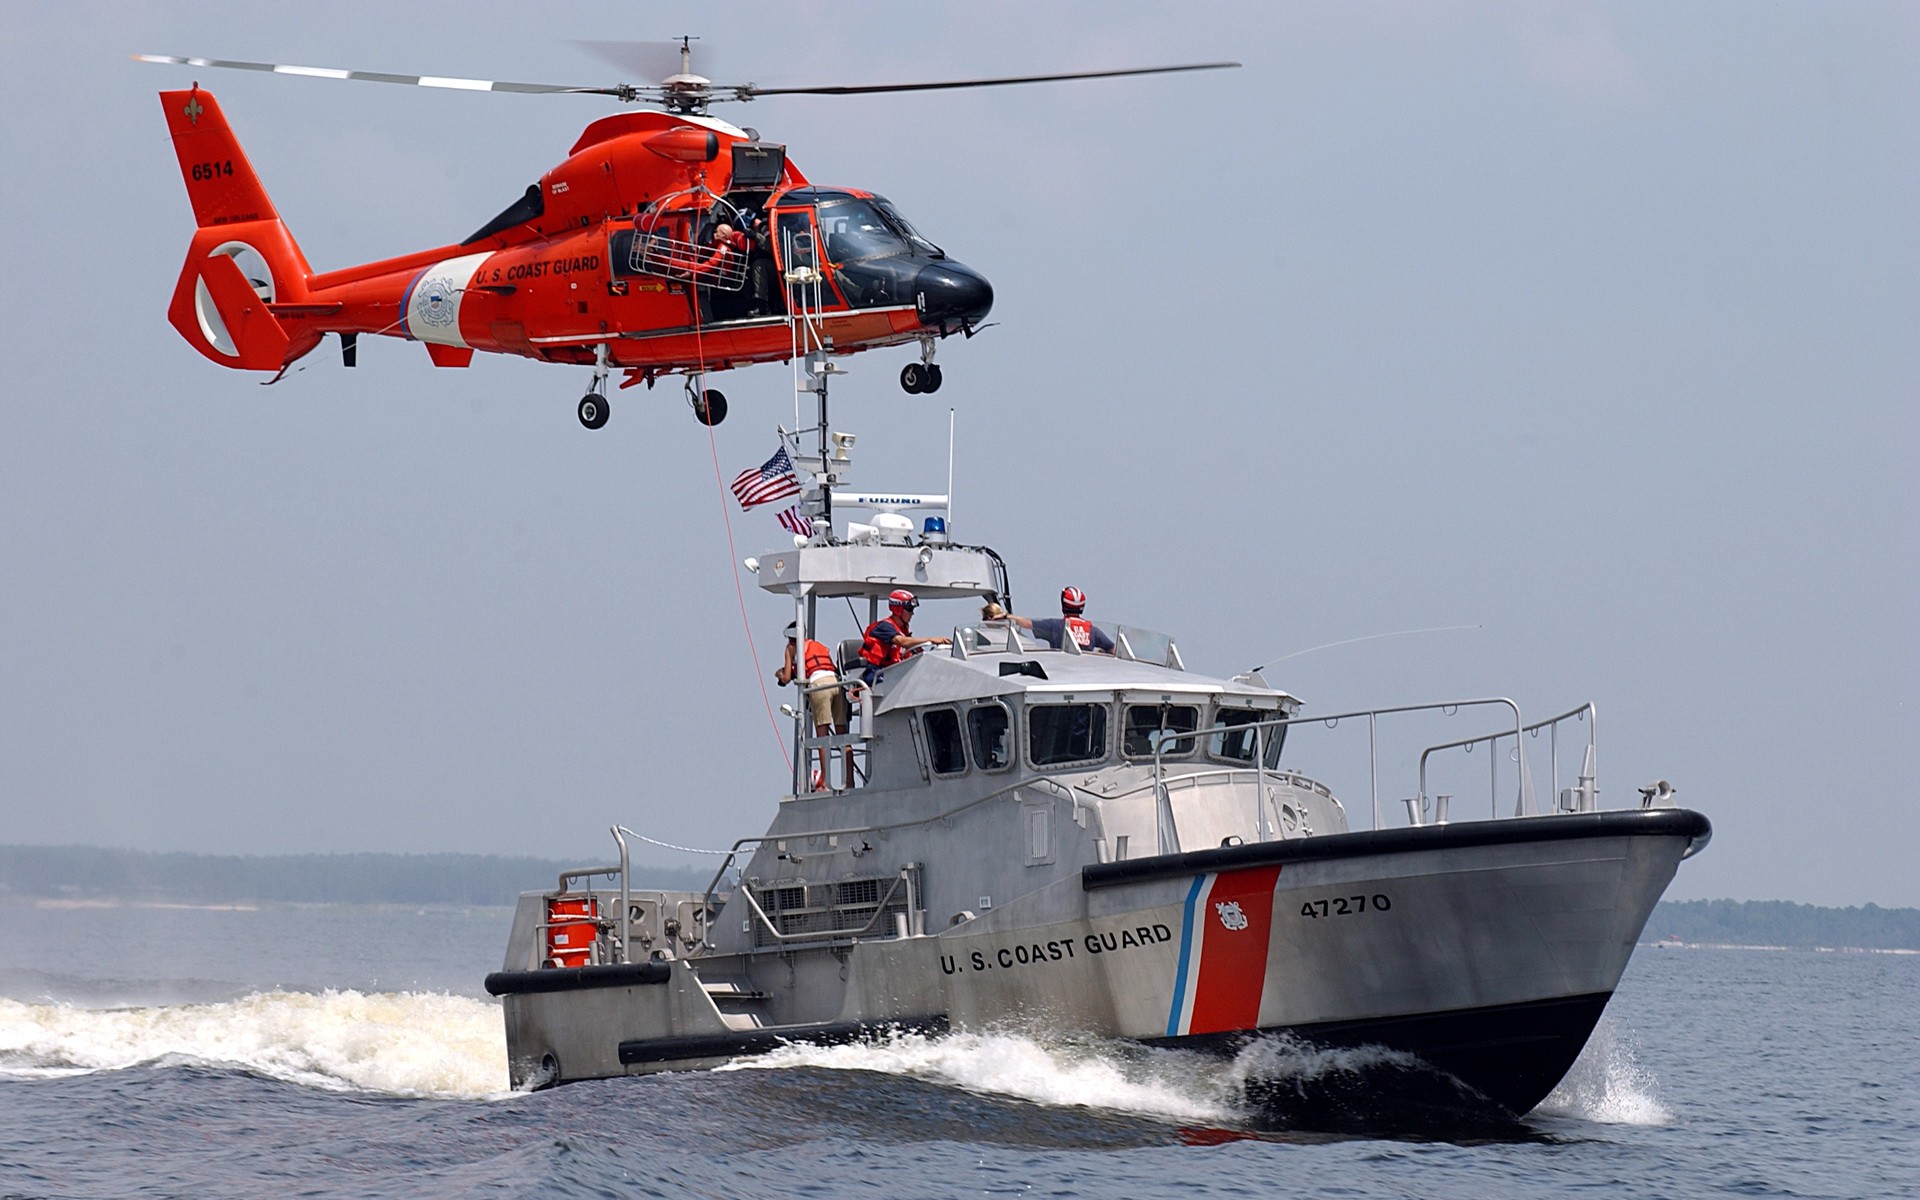 ship-boat-aircraft-Rescue-navy-watercraft-helicopter-1920x1200-px-helicopter-rotor-rotorcraft-united-states-coast-guard-cutter-missile-boat-submarine-chaser-fast-attack-craft-motorboat-patrol-boat-pilot-boat-coast-g